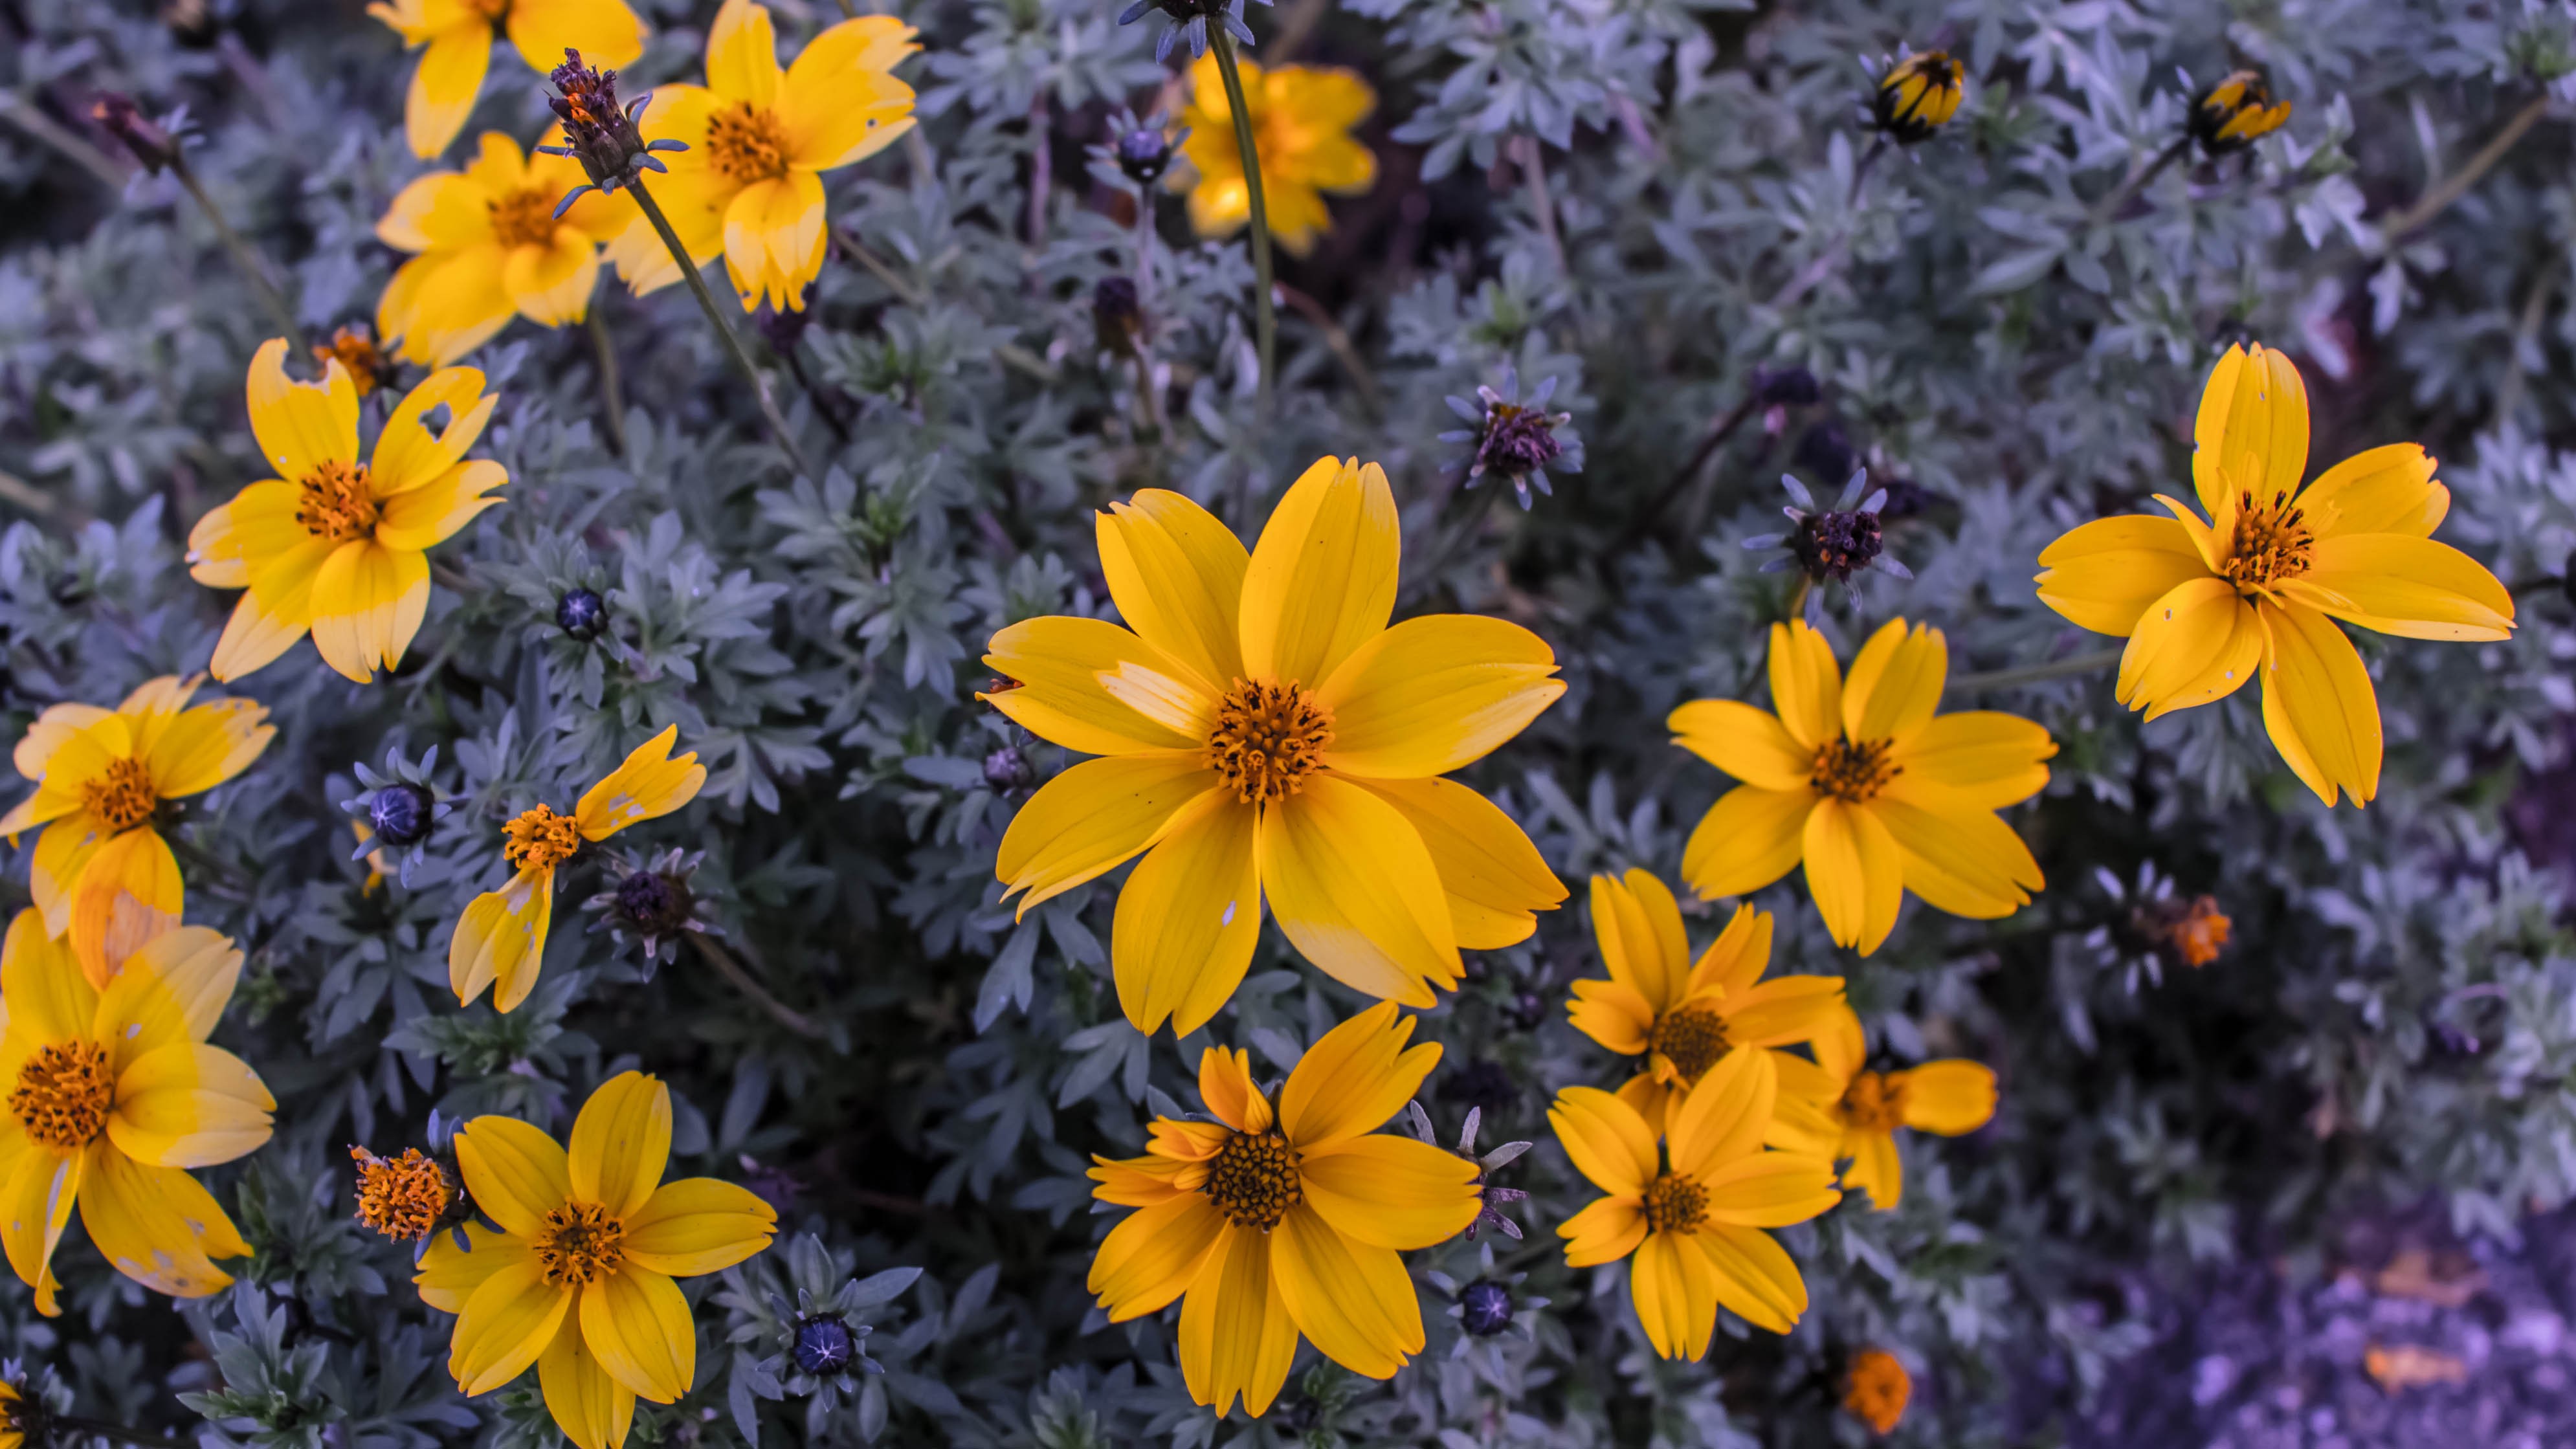 General 3980x2239 yellow flowers nature flowers plants